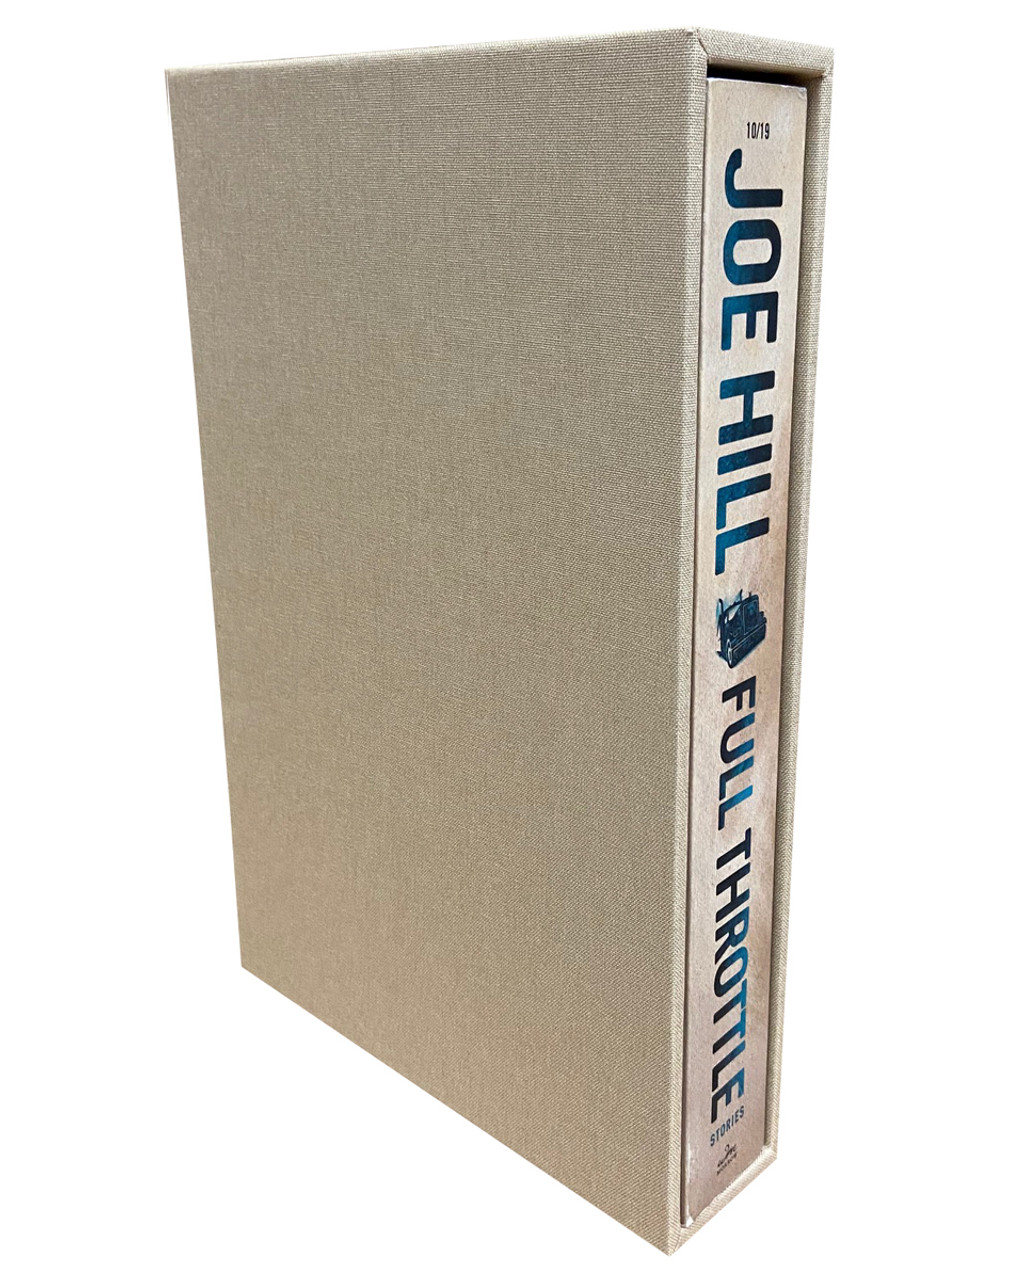 Joe Hill "Full Throttle" Softcover ARC Signed First Edition Proof, Slipcased w/COA [Very Fine]